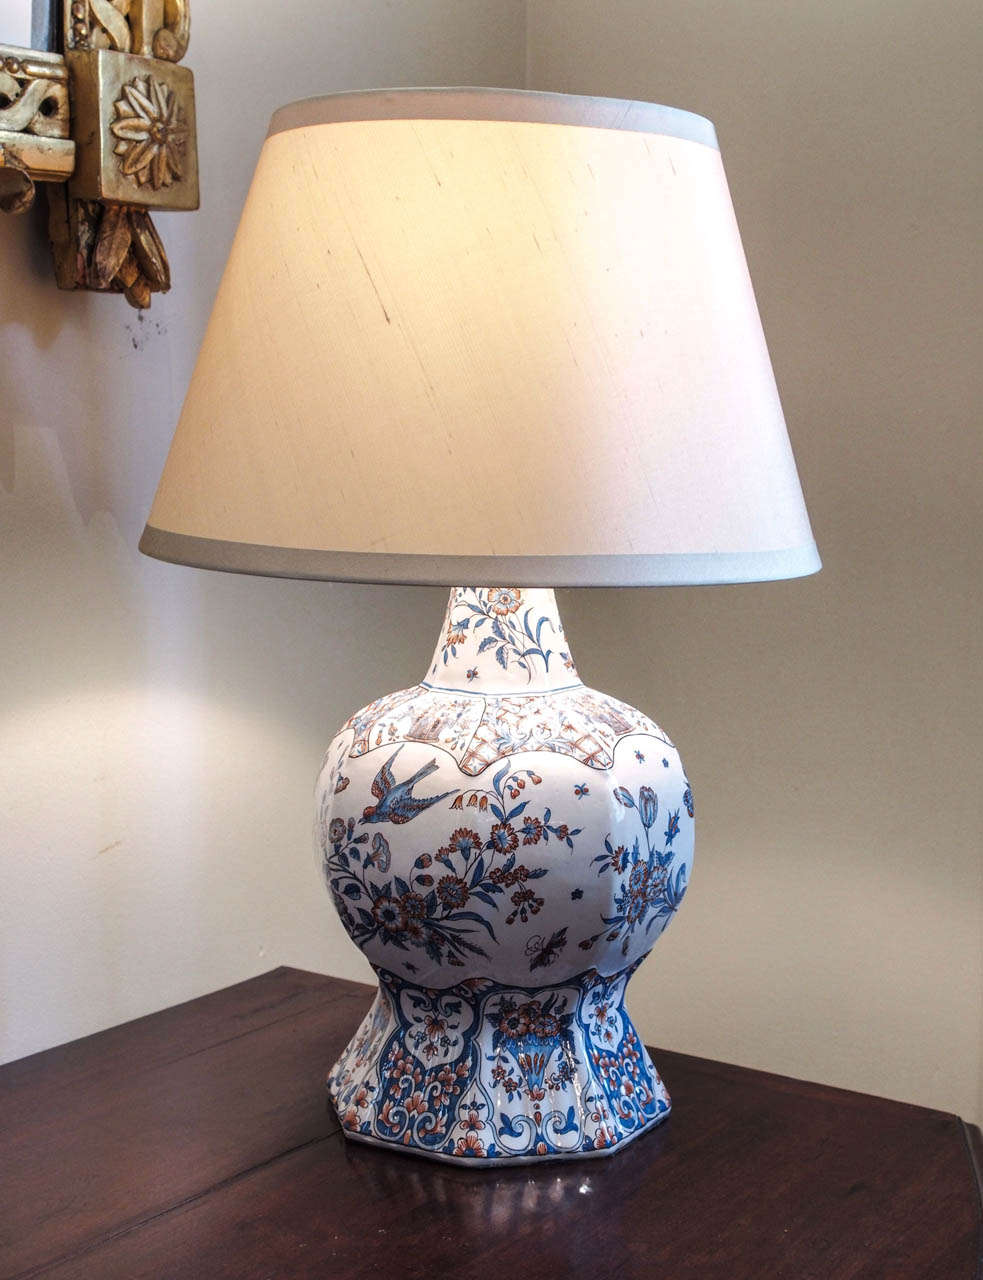 A 19c. faience gourd shaped vase now mounted as a lamp.  Finely painted in blues and reds on a creamy white ground.